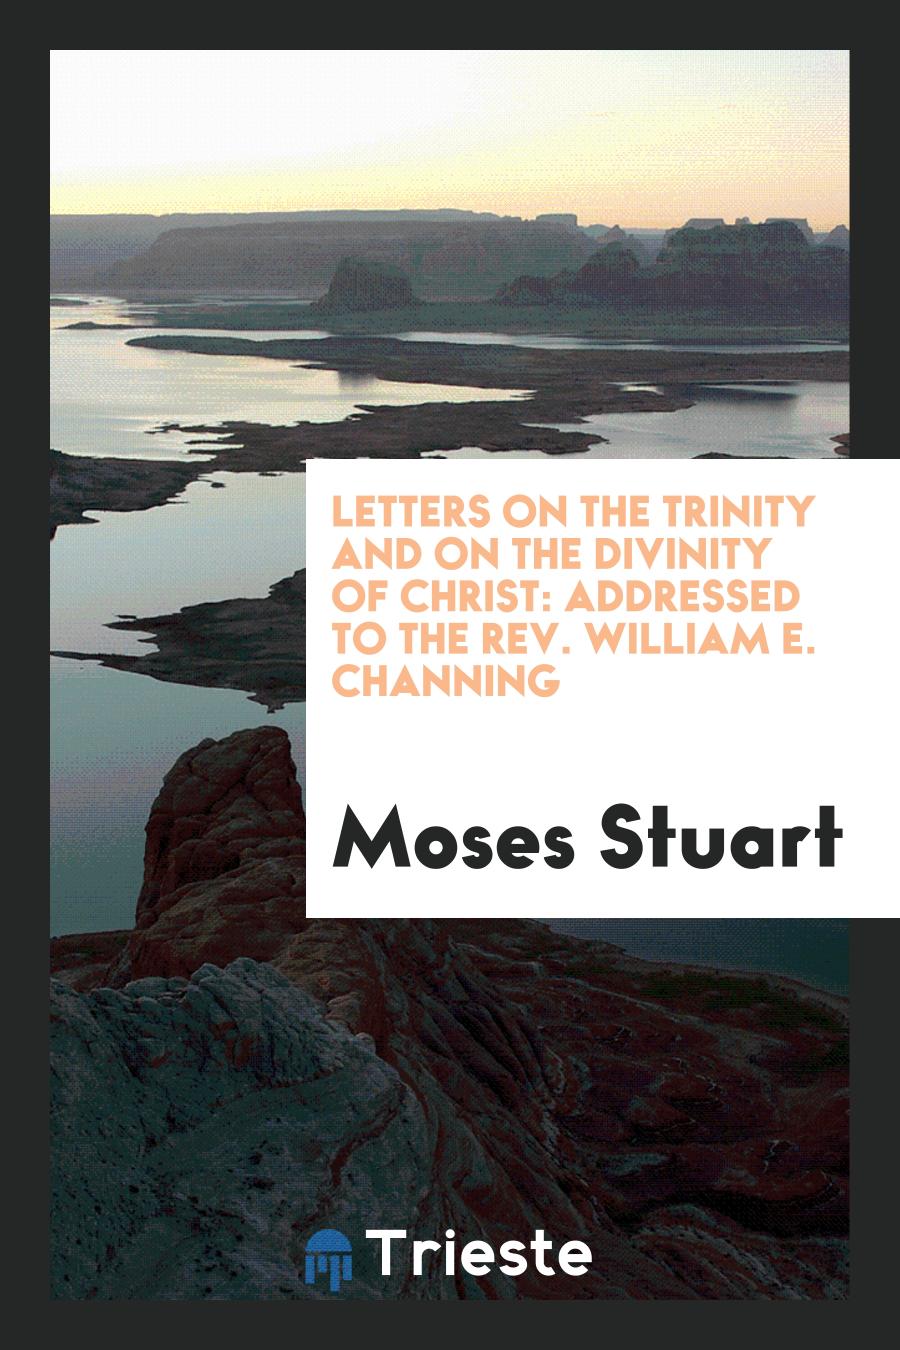 Letters on the Trinity and on the Divinity of Christ: Addressed to the Rev. William E. Channing